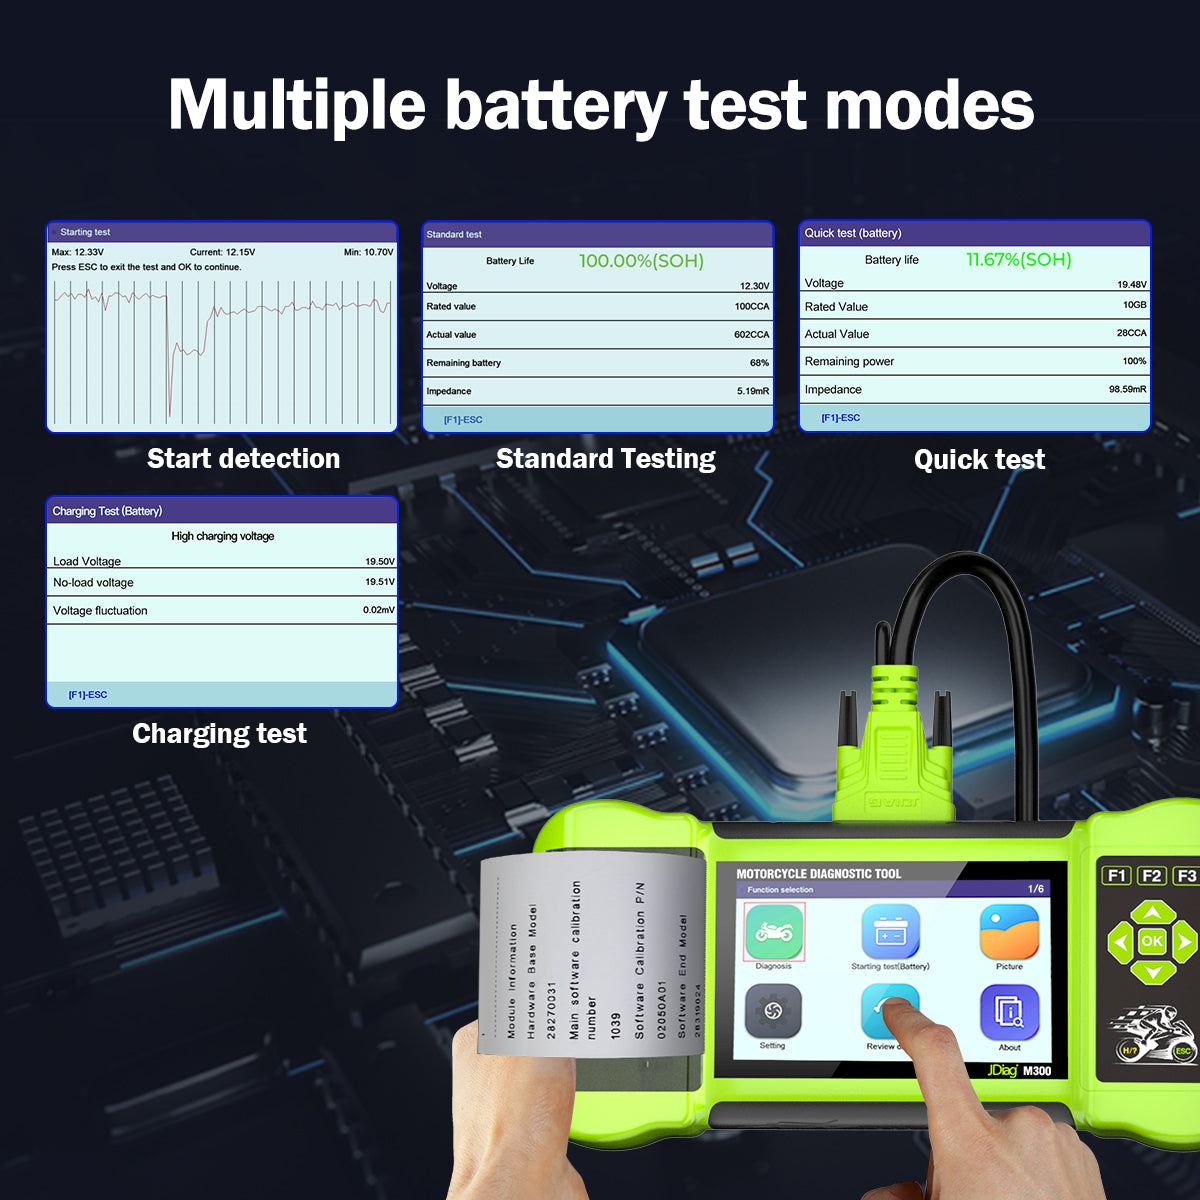 Mutiple battery test modes of diagntisc tool